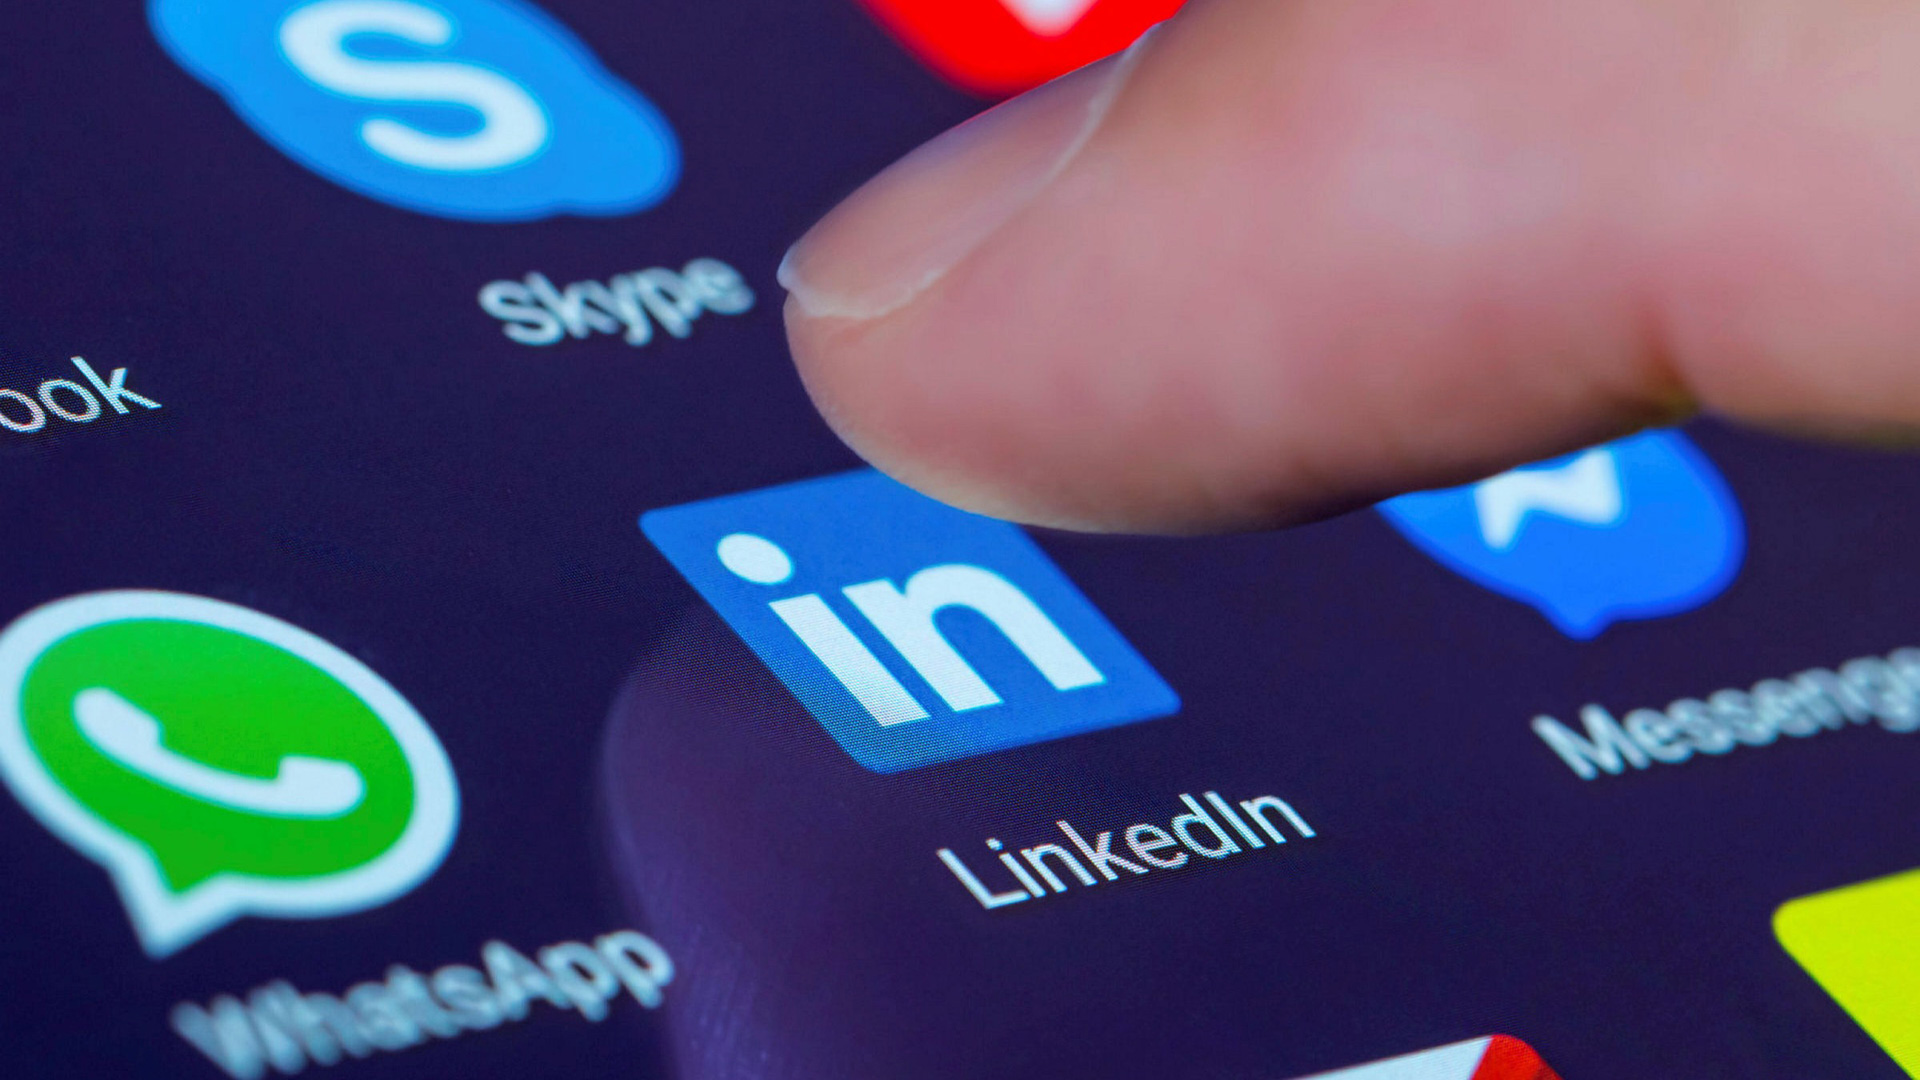 How to see saved posts on LinkedIn?